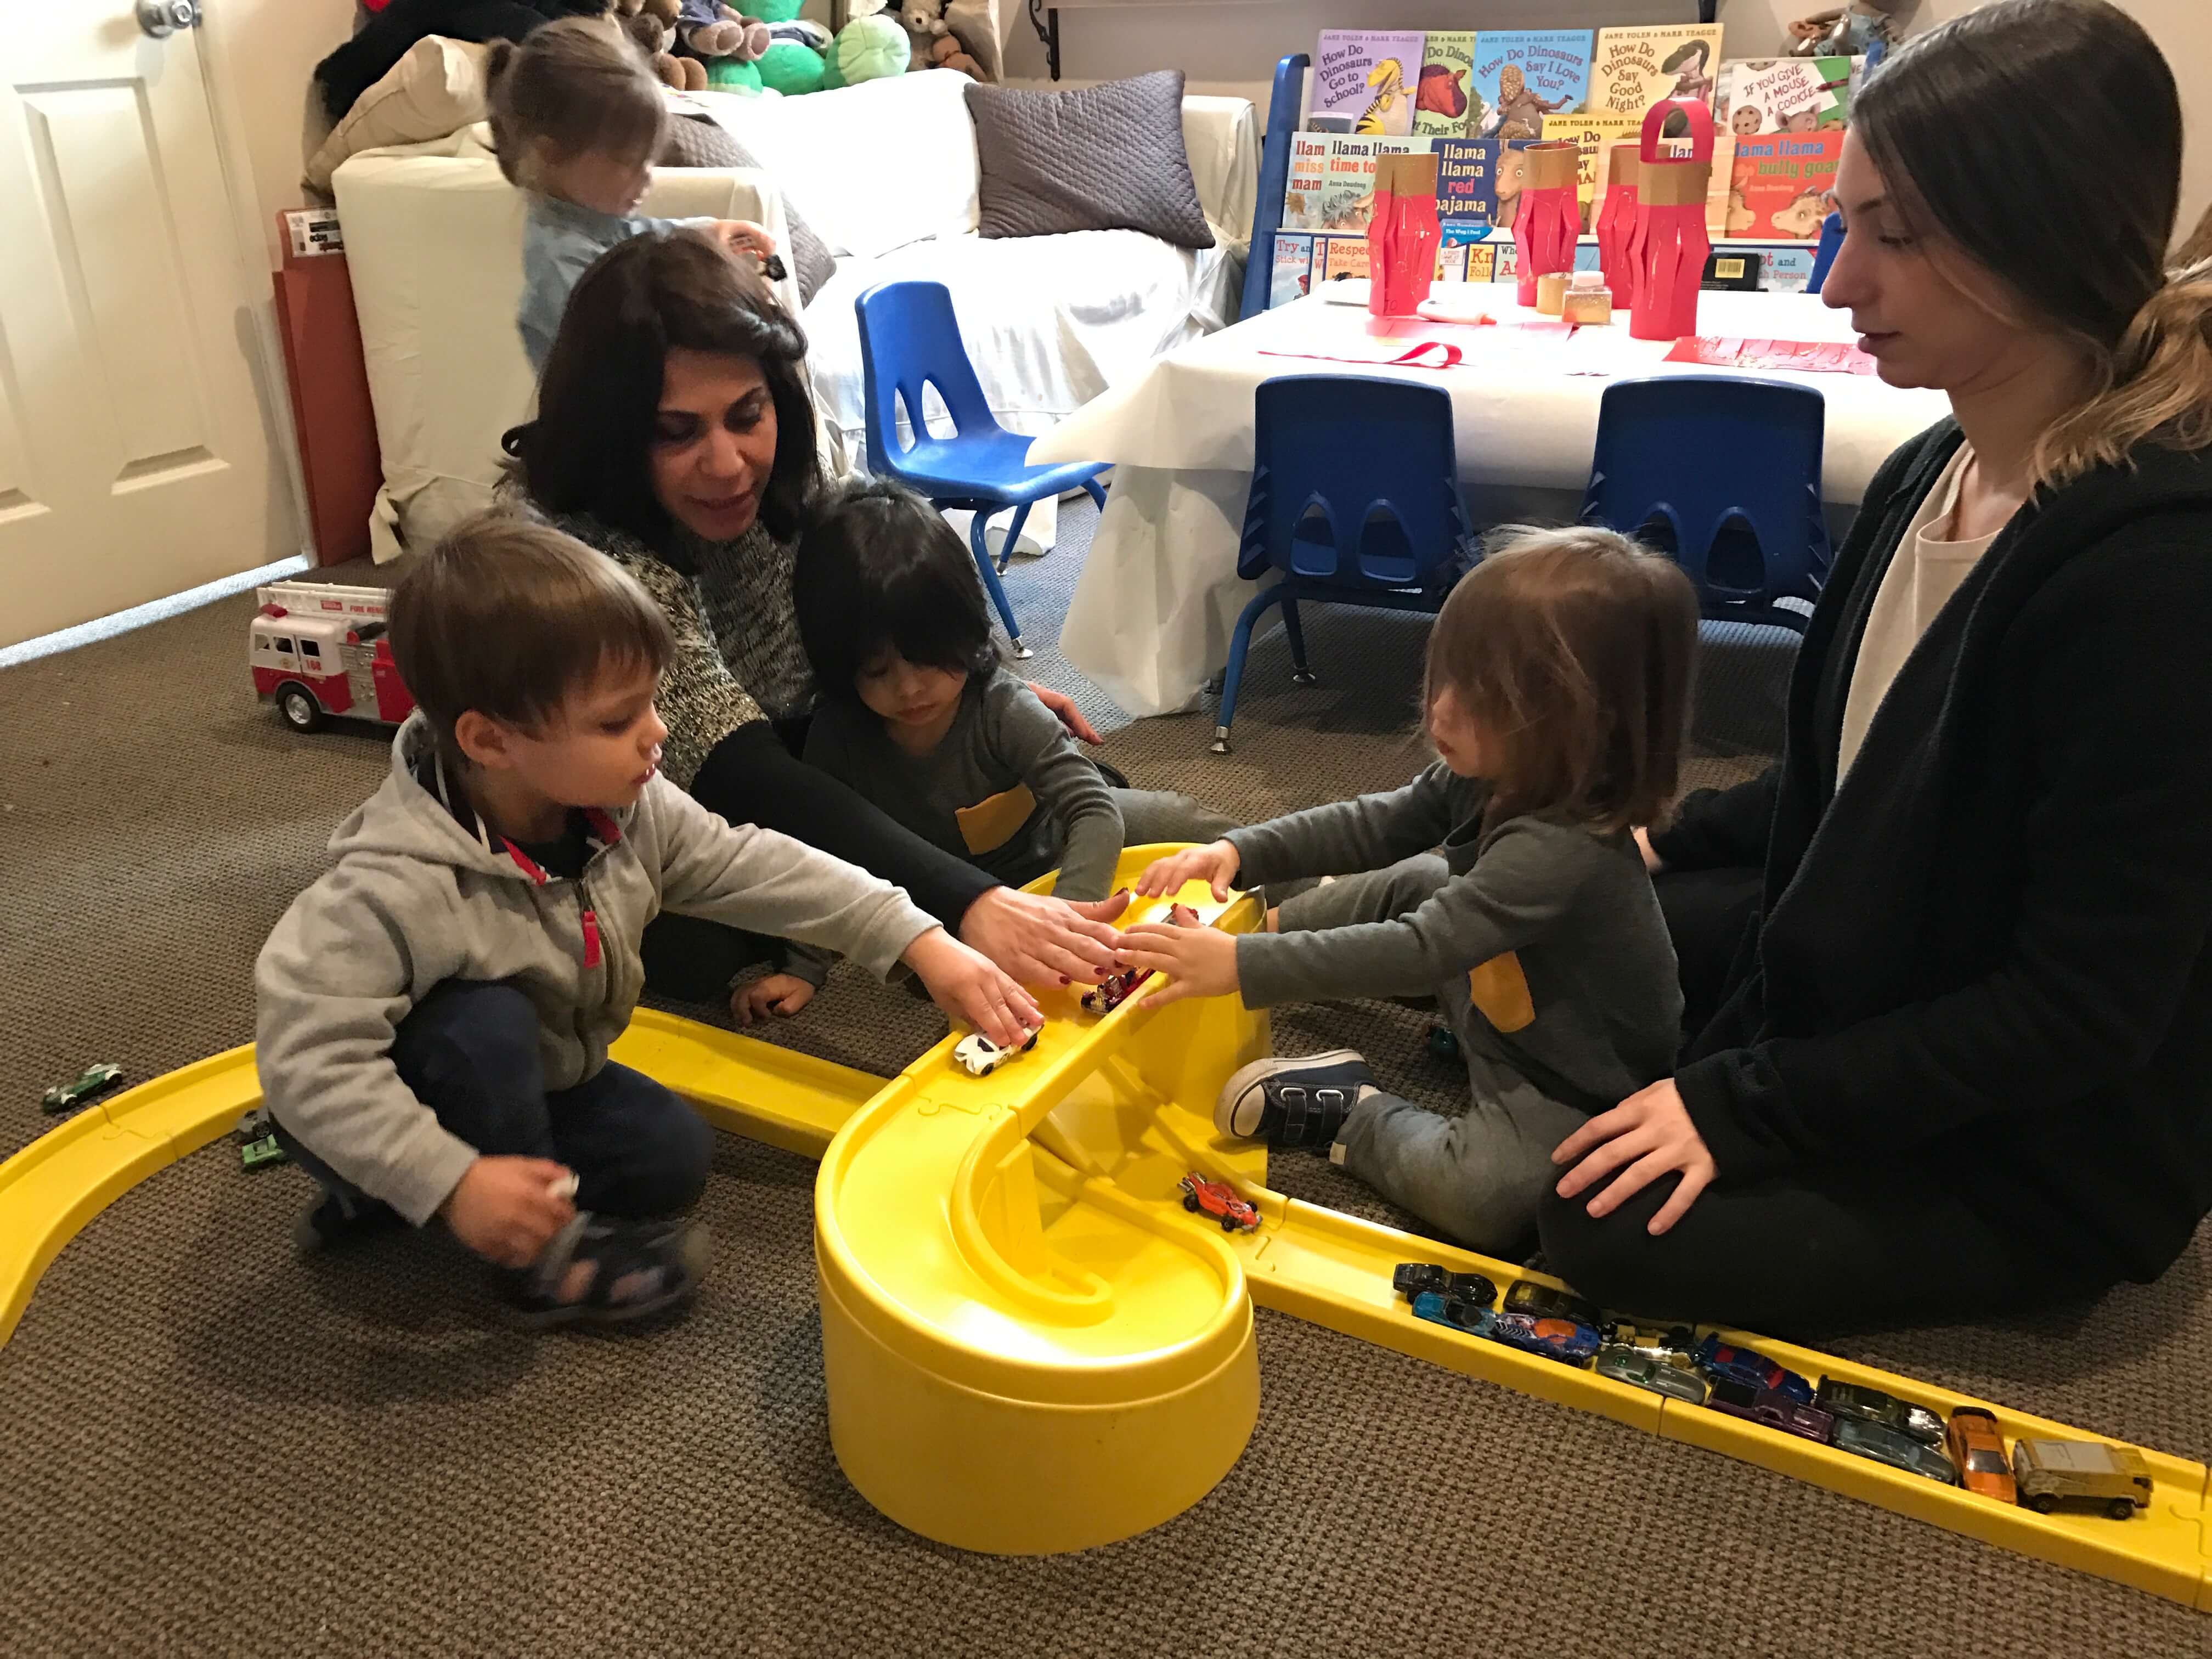 2 toddlers playing with cars on the trail, learning to take turns being supervised by adults at early childhood development class